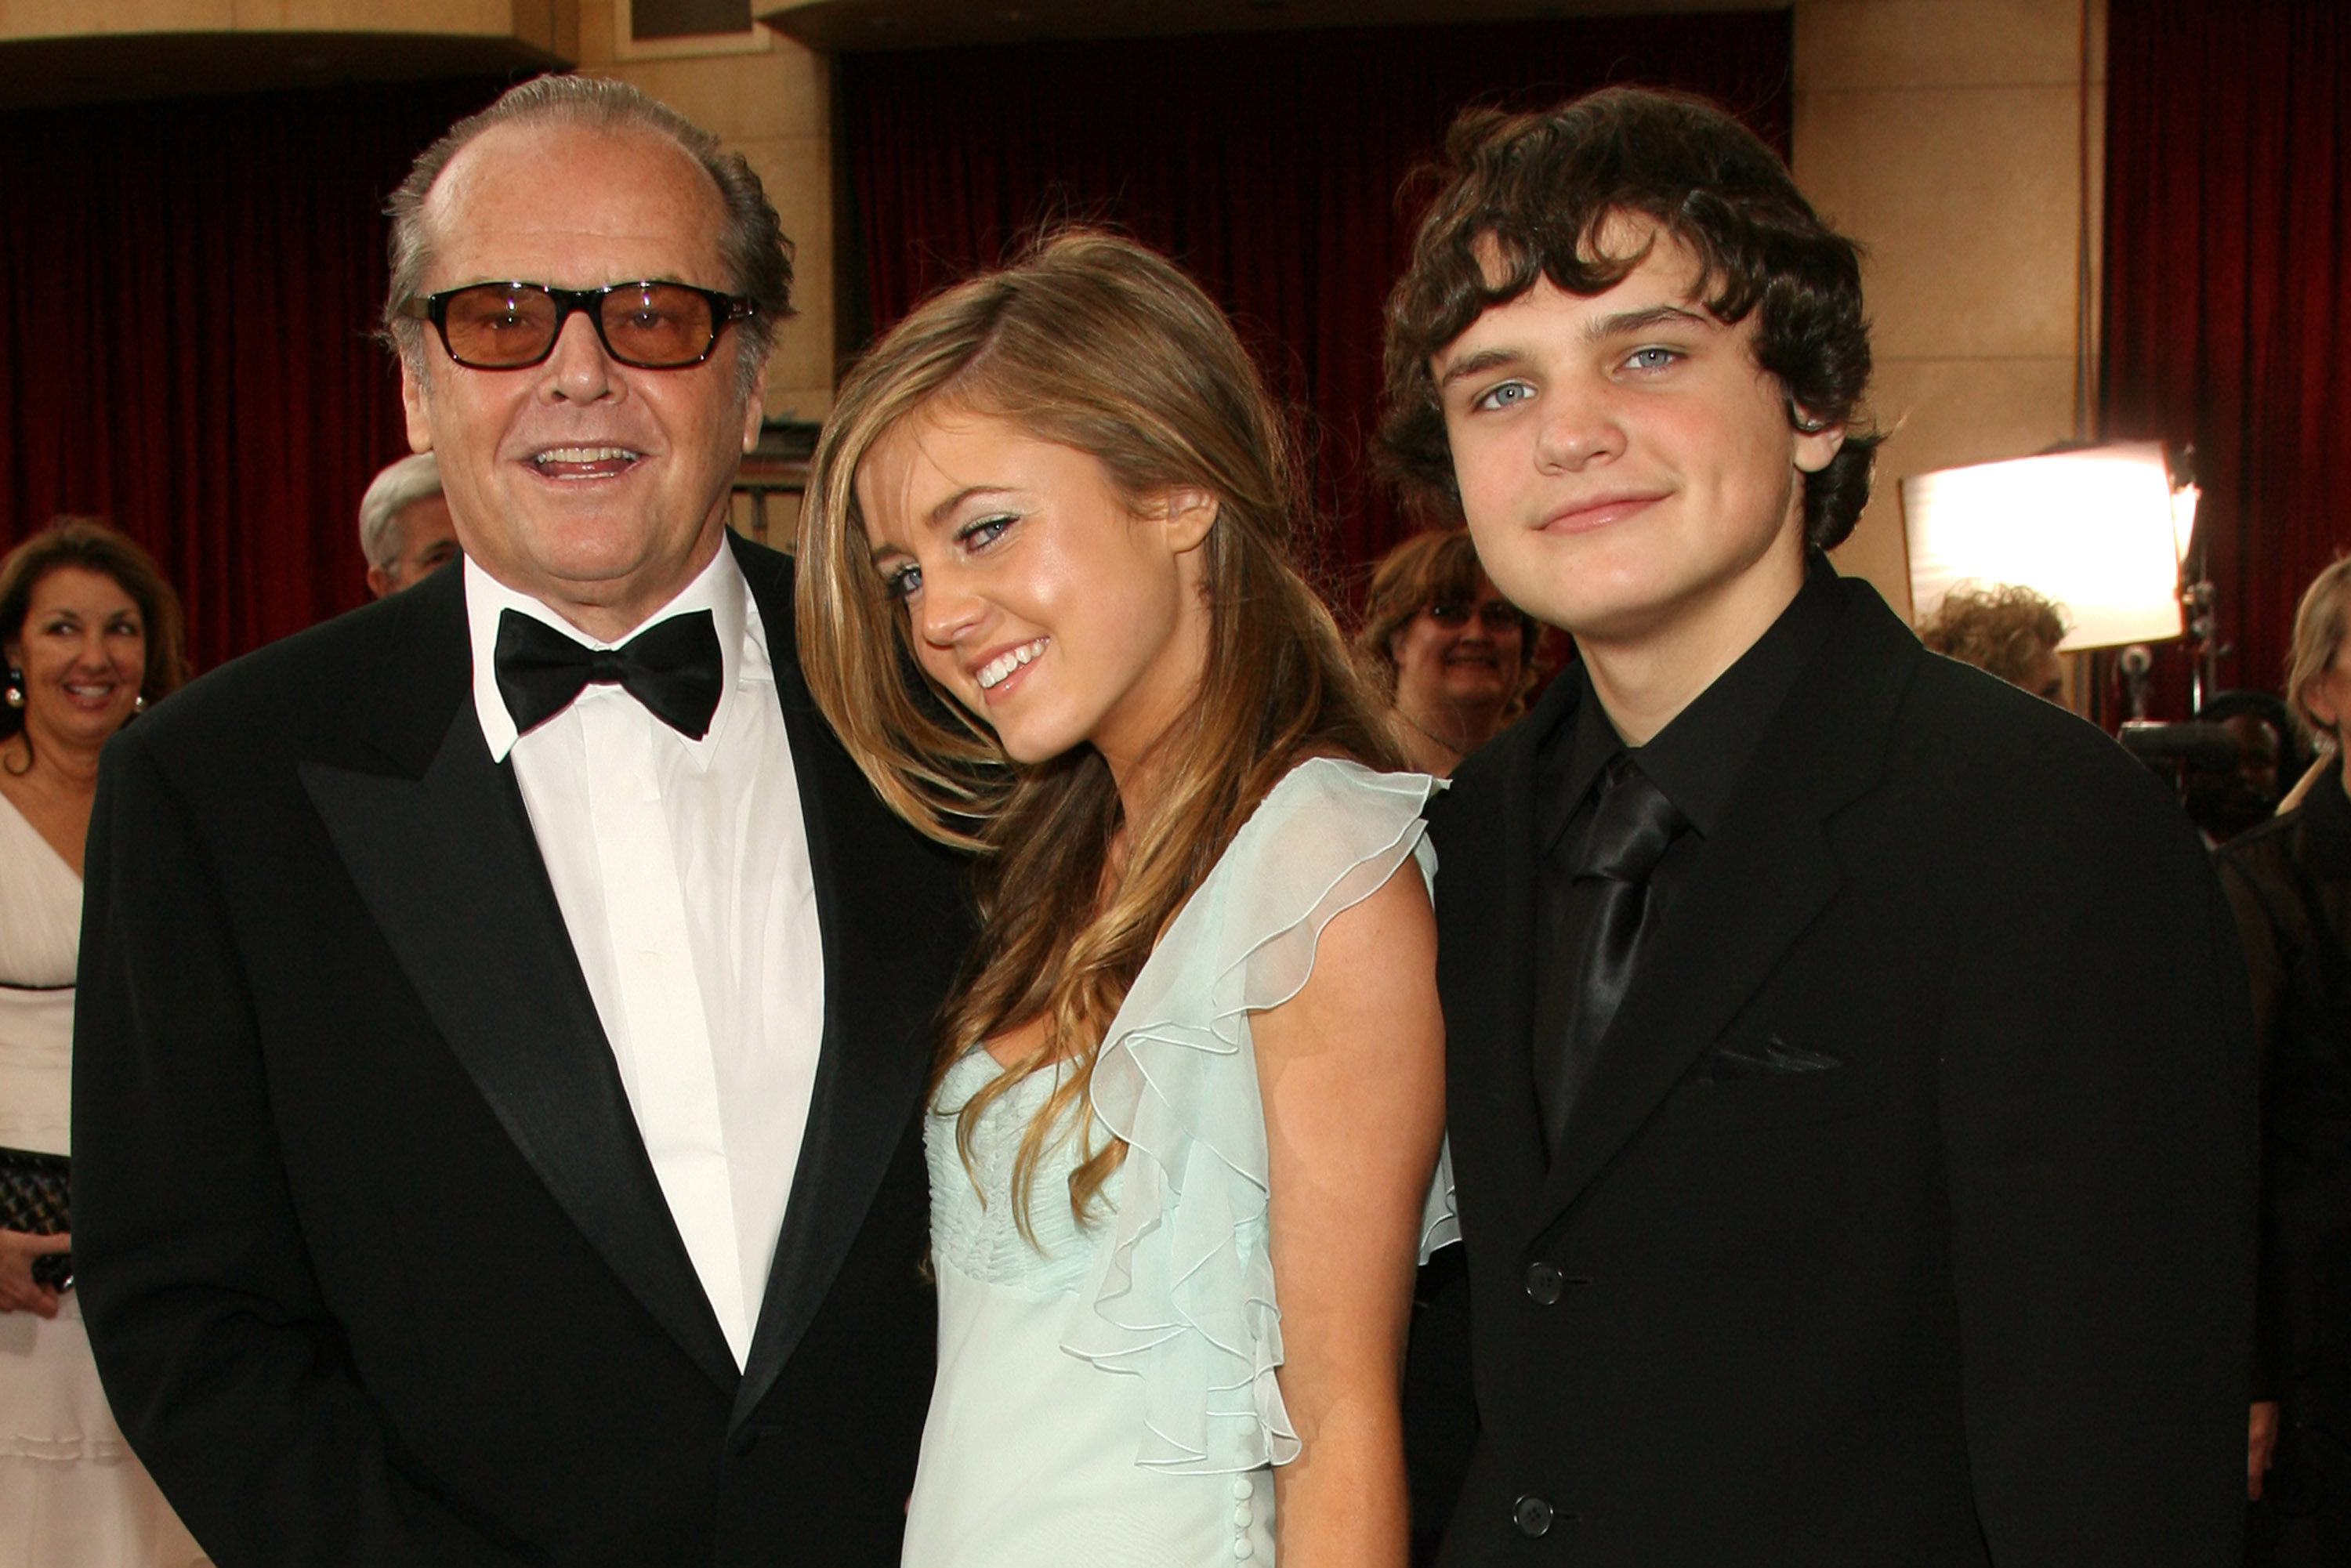 Jack Nicholson and his kids Lorraine and Raymond in California in 2006 | Source: Getty Images